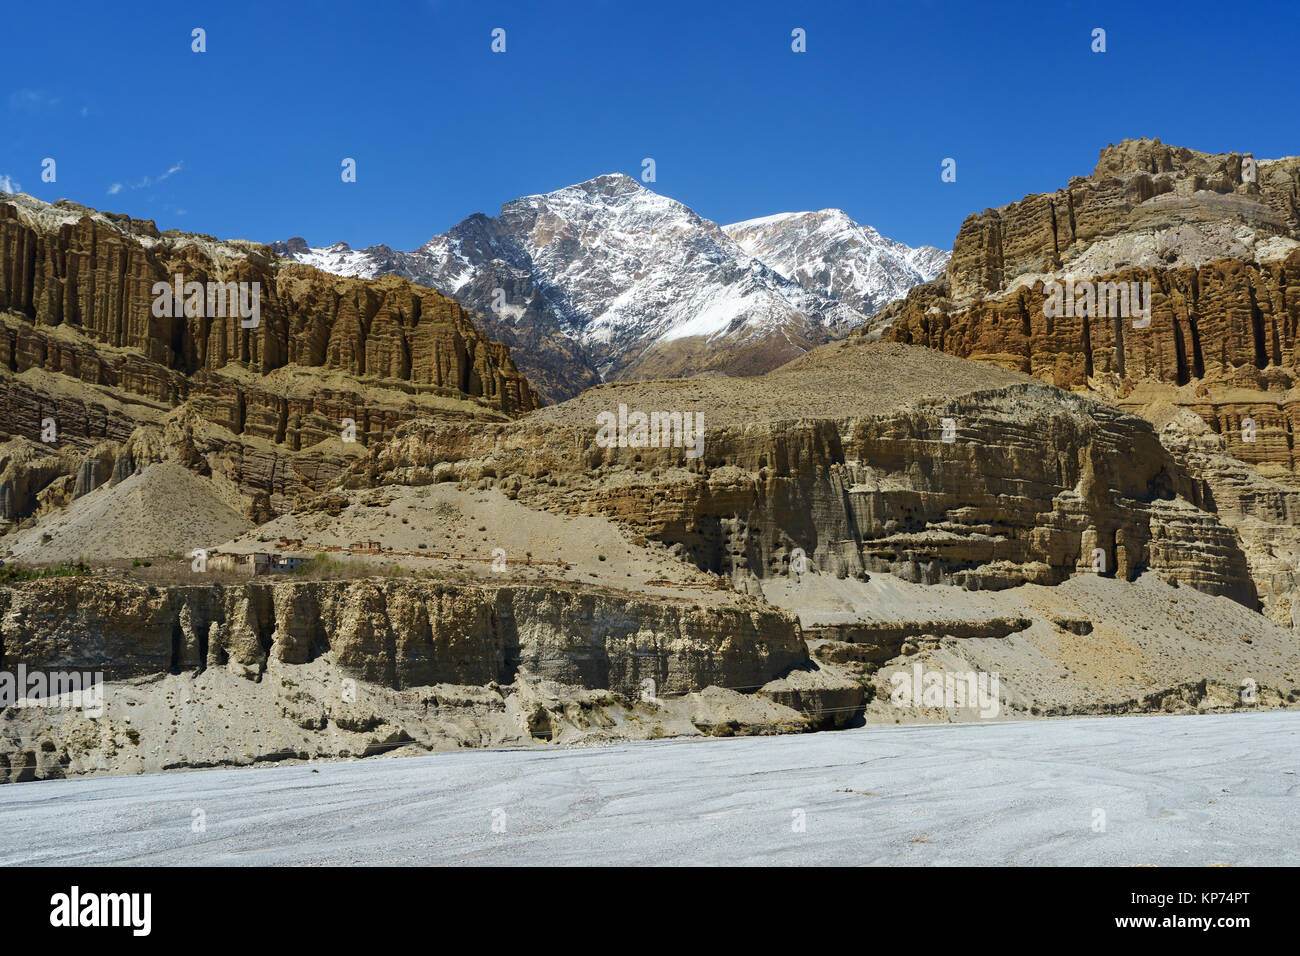 Spectacular cliffs and snowy peak seen from Chuksang, Upper Mustang region, Nepal. Stock Photo